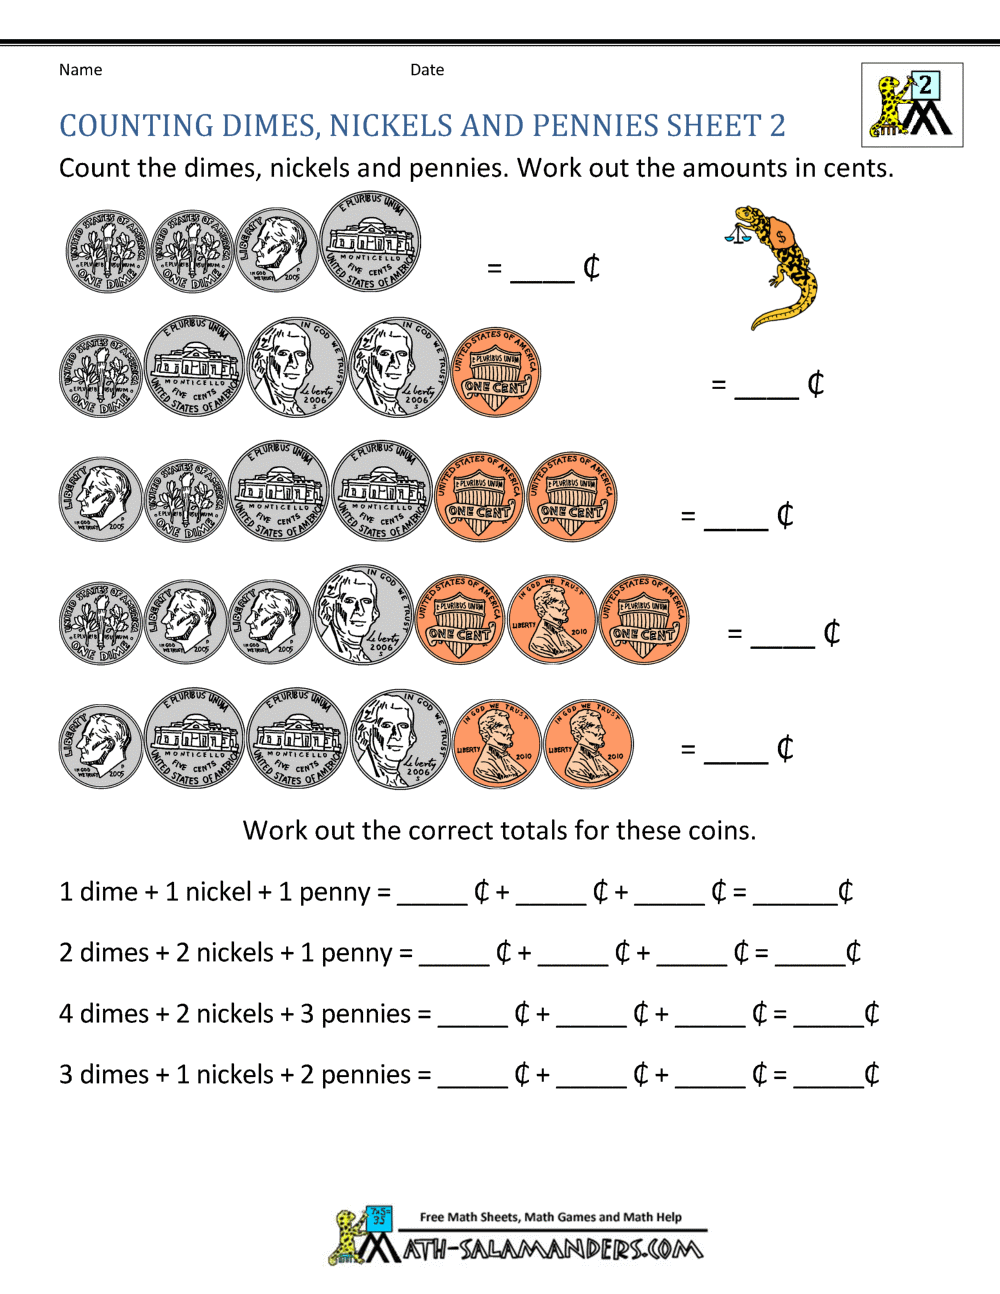 Counting Money Printable Worksheets | Search Results ...